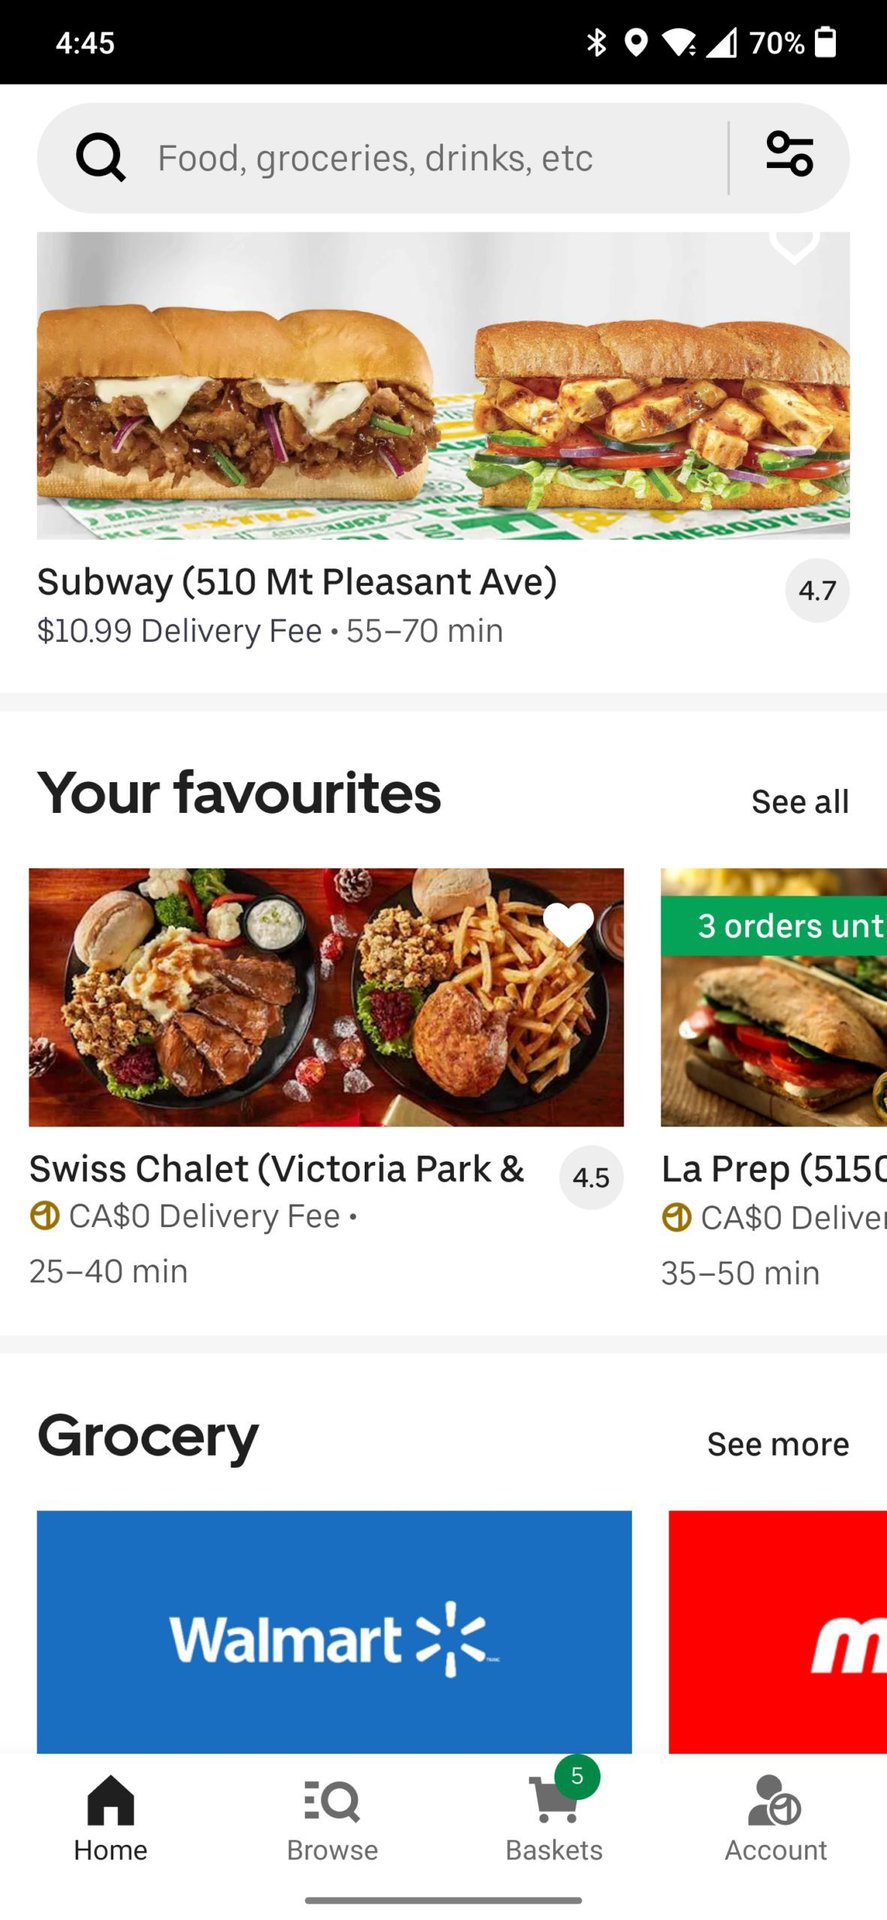 restaurant list on home page showing favorites